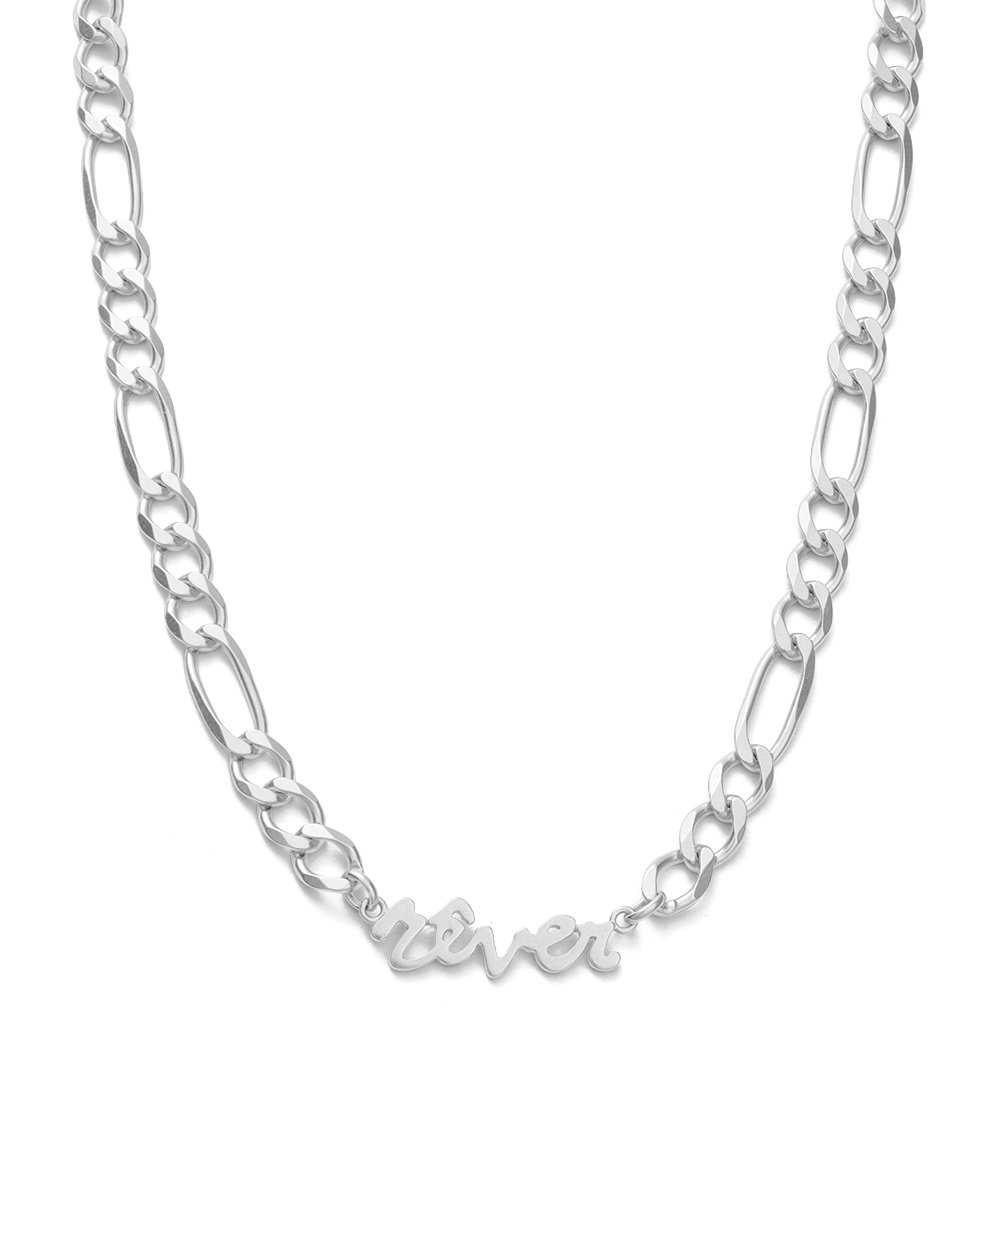 FOLD CHAIN NECKLACE (18K GOLD PLATED) – KIRSTIN ASH (New Zealand)